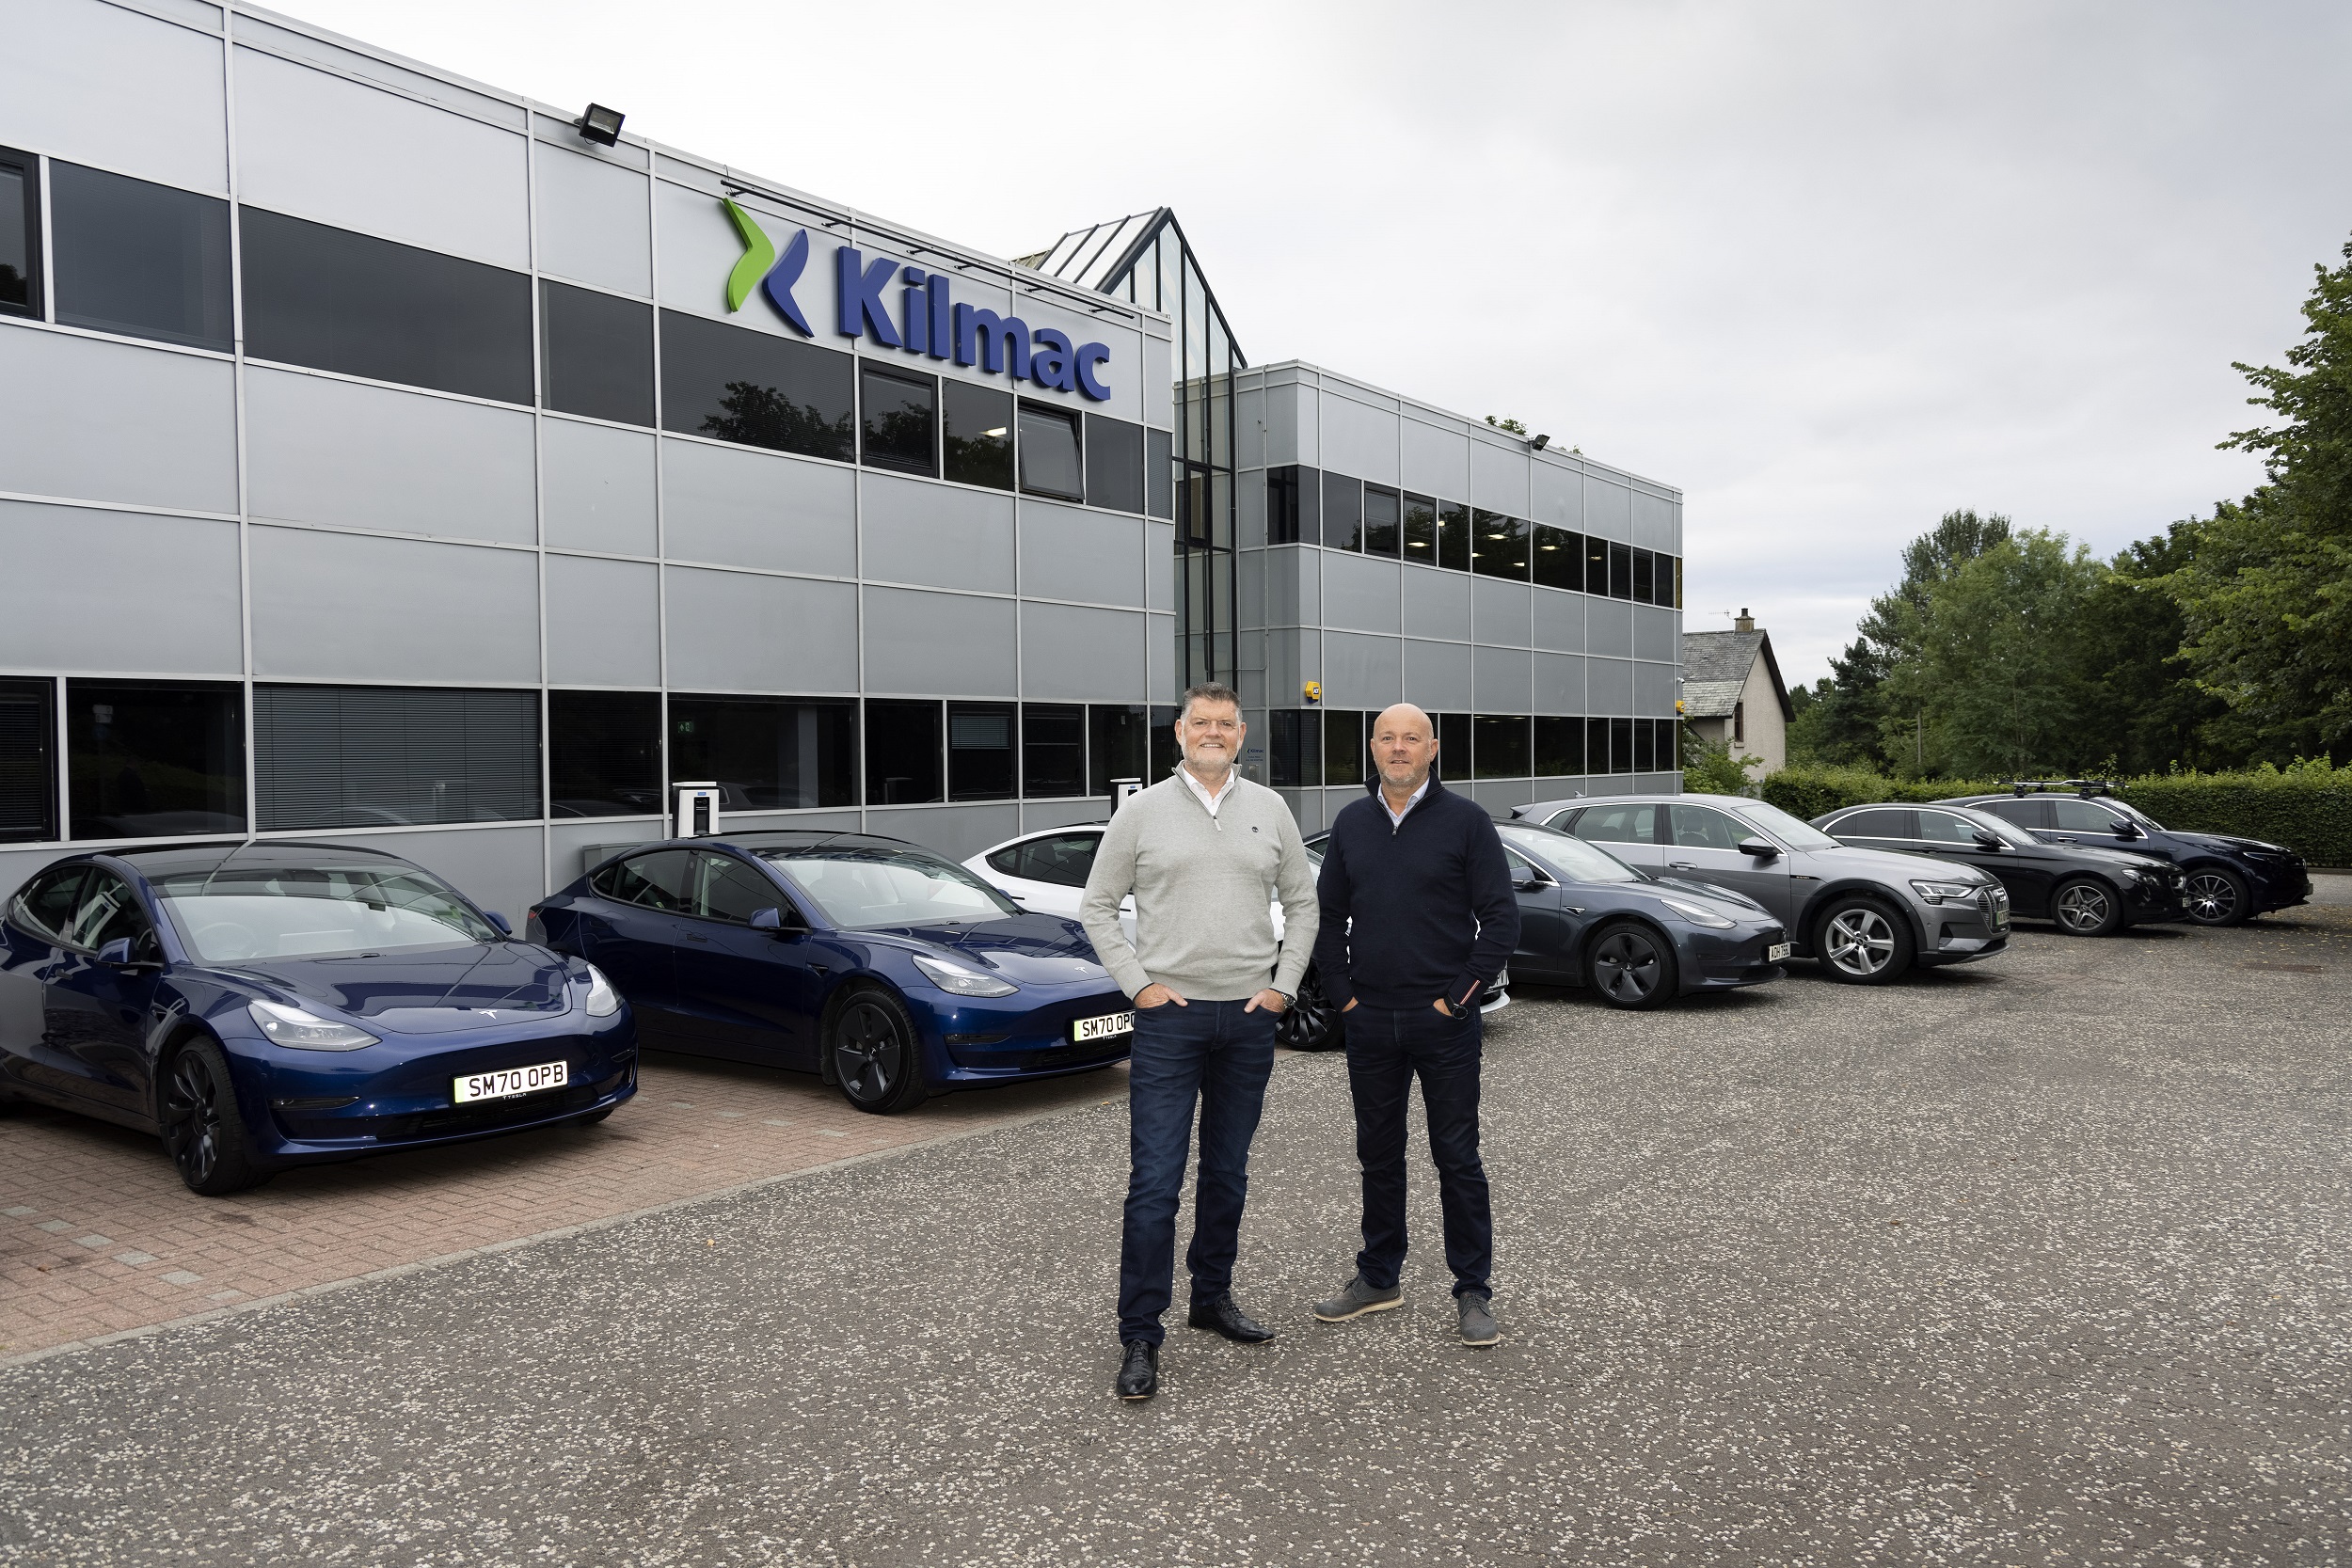 Construction Leader: Richard Kilcullen on the competitive tendering paying dividends for Kilmac